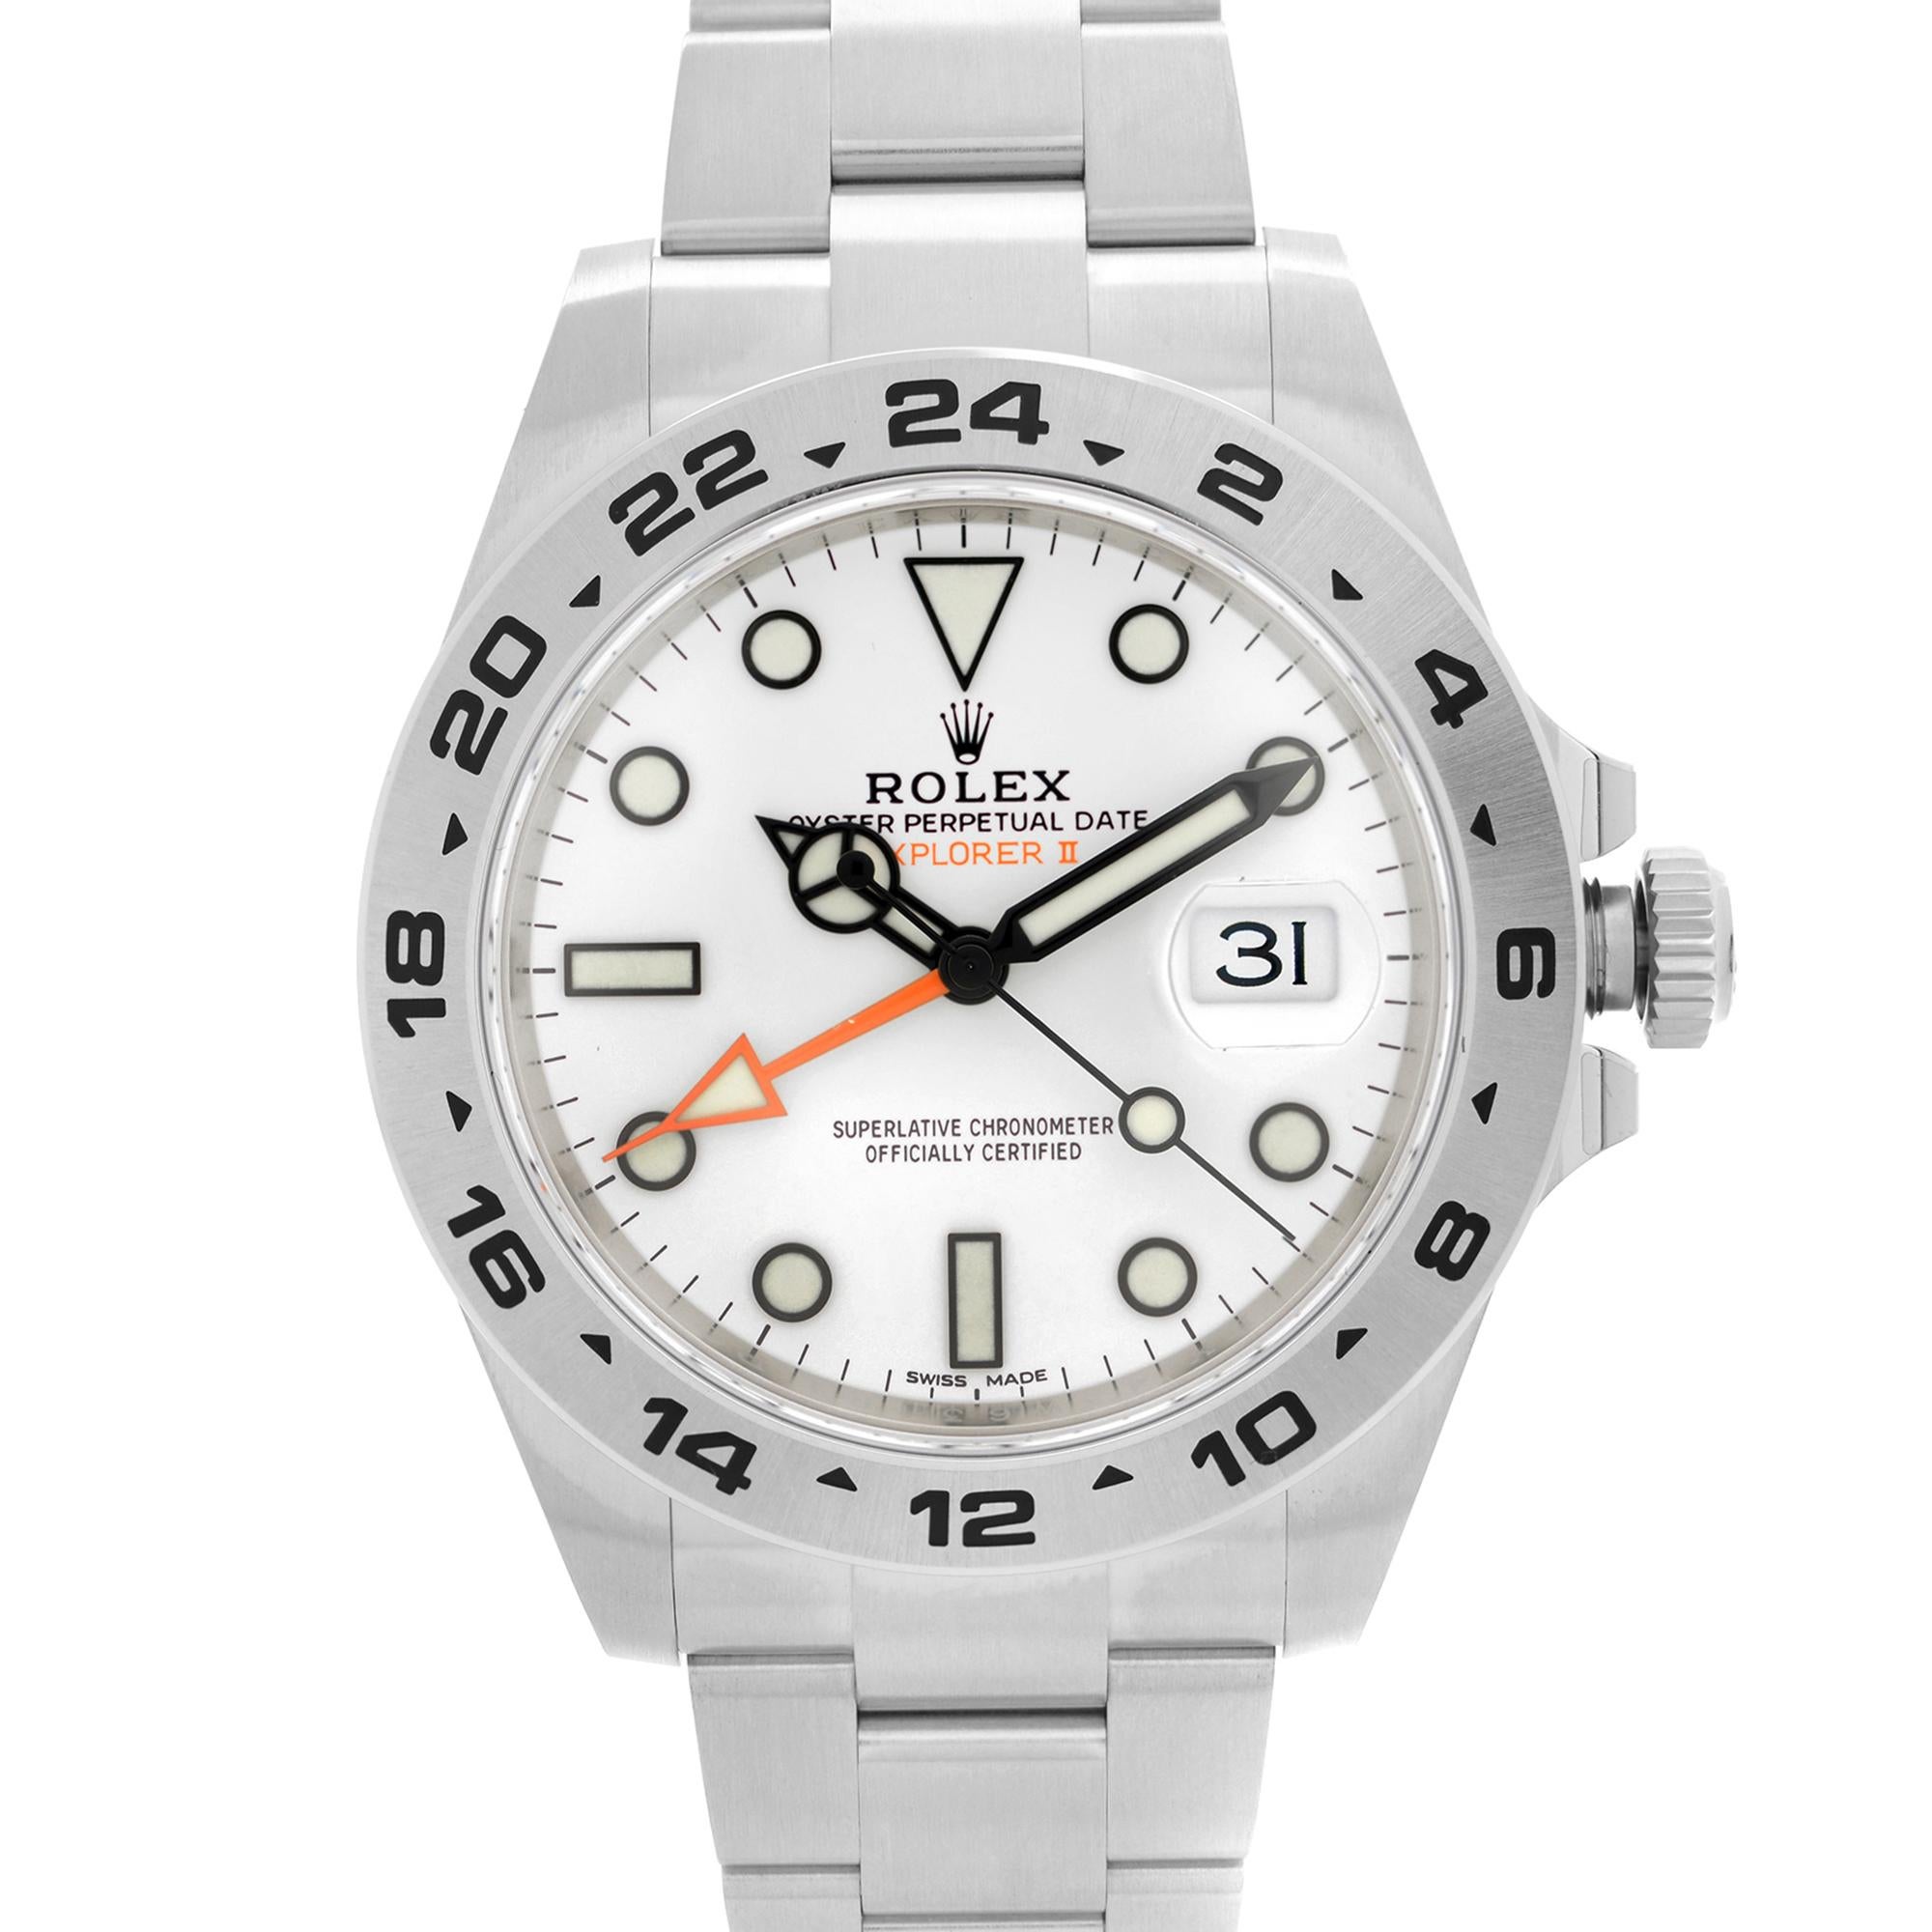 Display Model Discontinued  Rolex Explorer II GMT Stainless Steel White Dial Automatic Men's Watch 216570. Box and papers included

Details:
Brand Rolex
Department Men
Model Number 216570
Country/Region of Manufacture Switzerland
Model Rolex